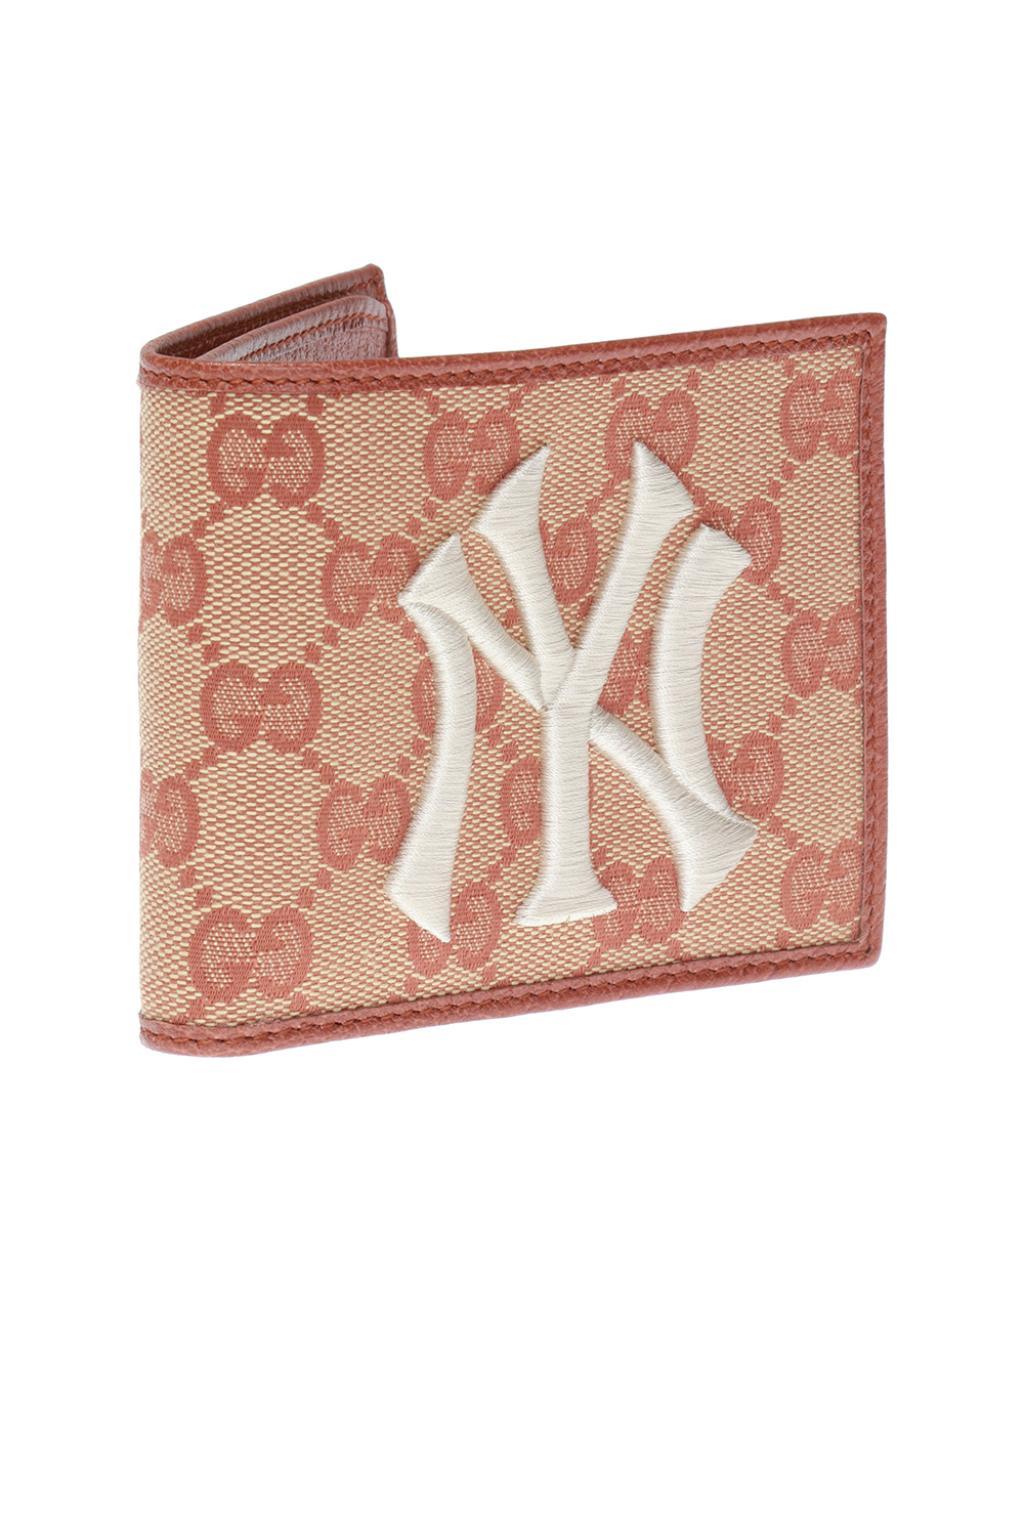 MLB, Bags, New York Yankees Leather Bifold Wallet